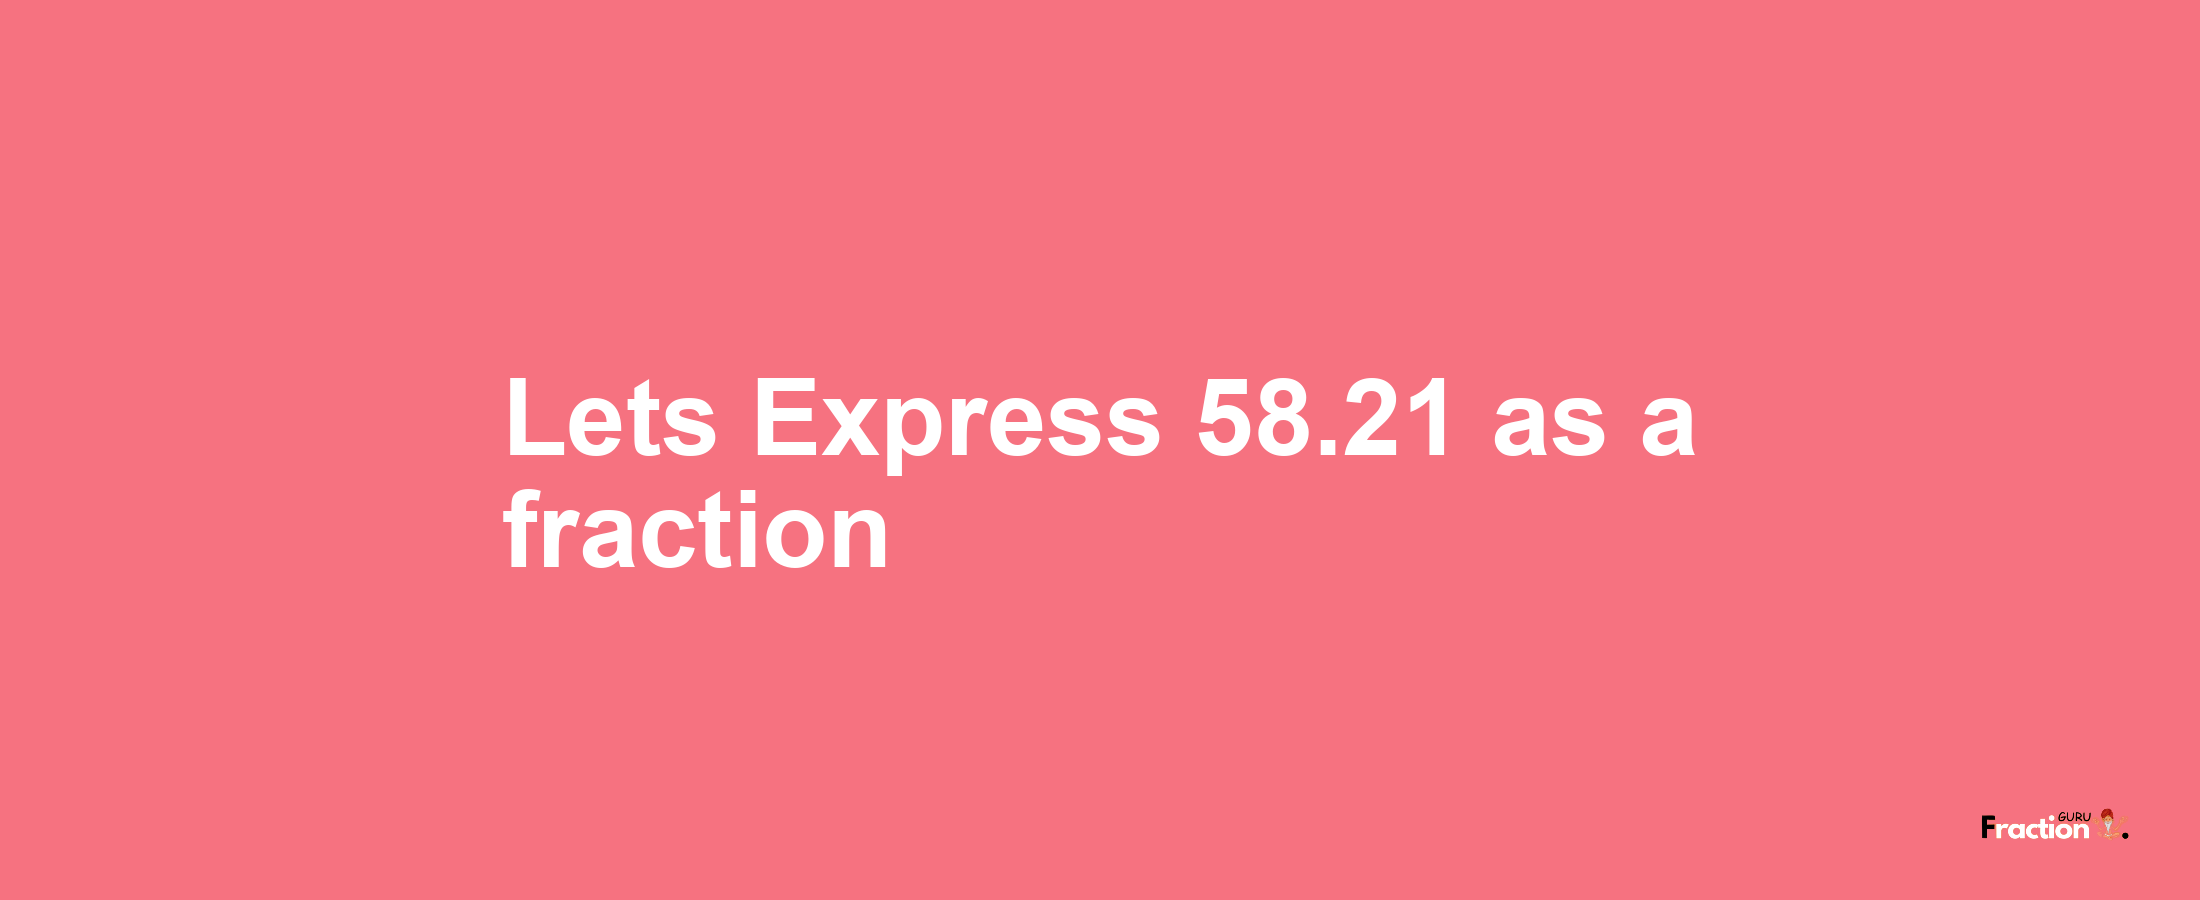 Lets Express 58.21 as afraction